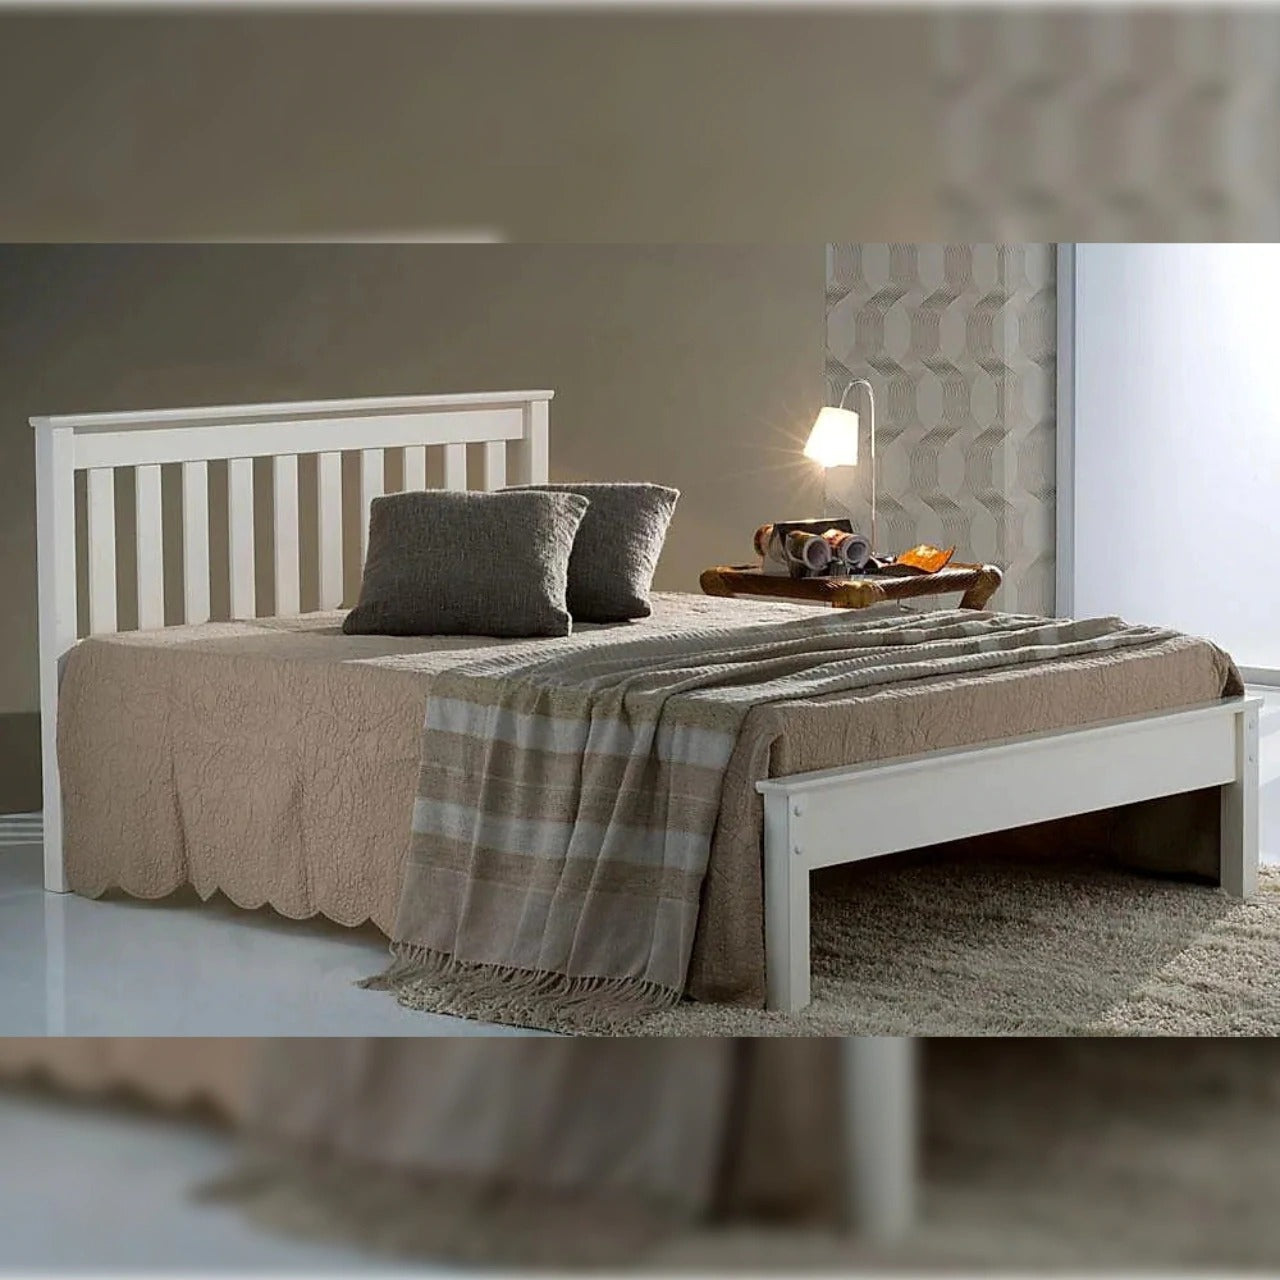 Double Bed Design, Latest Double Bed Designs With Box, Double Bed Design Latest, Double Bed Box Design, Simple Double Bed Design, Wooden Double Bed Design